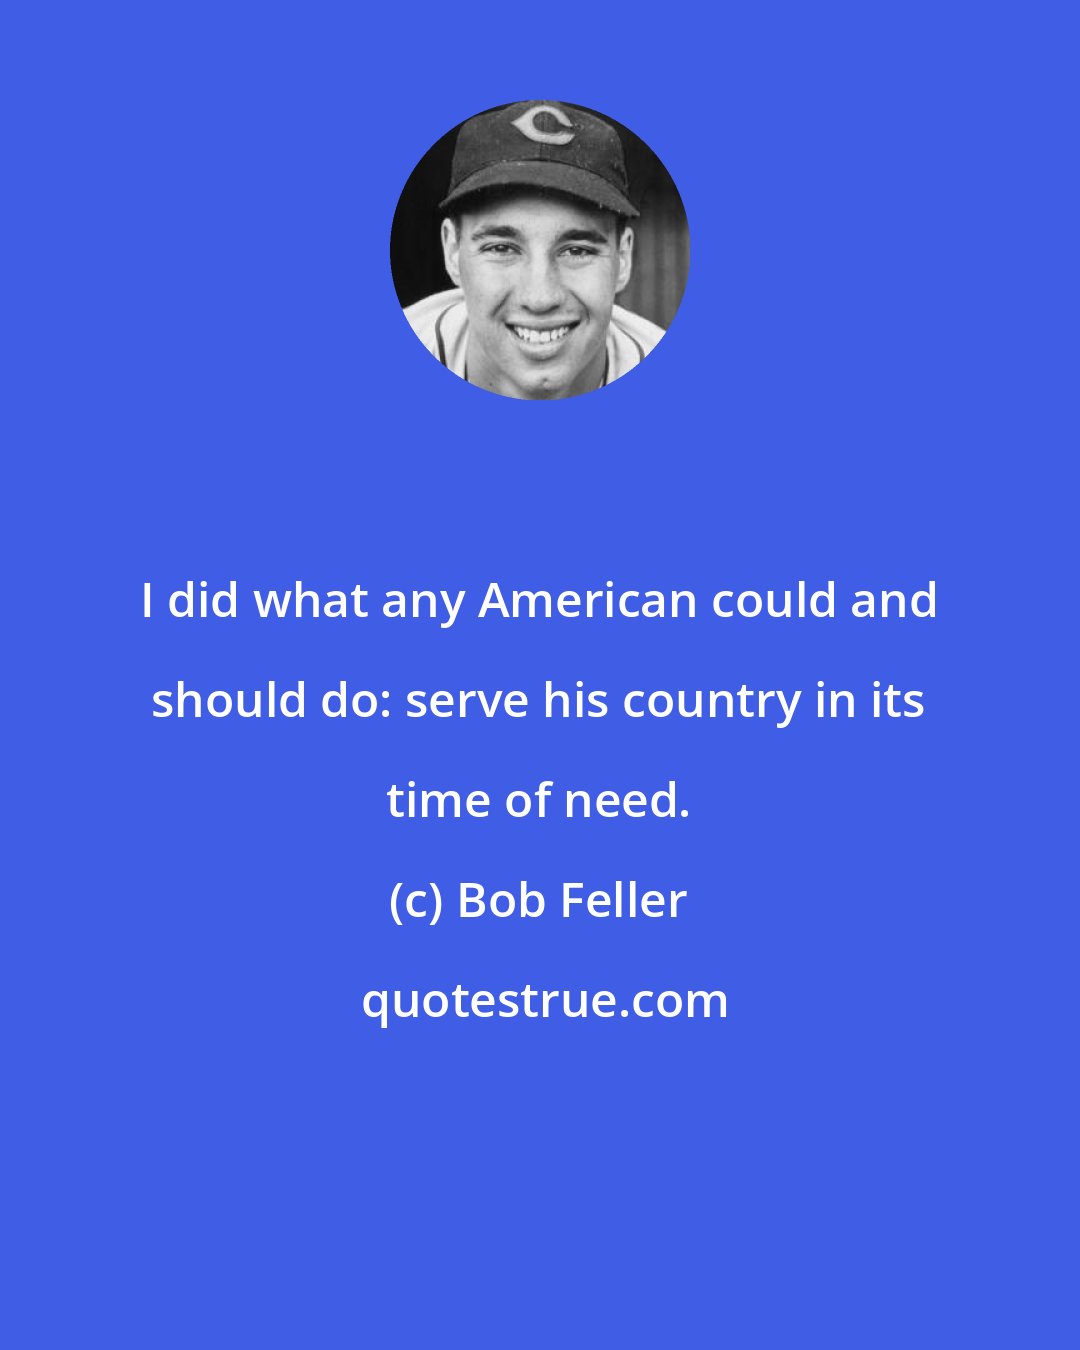 Bob Feller: I did what any American could and should do: serve his country in its time of need.